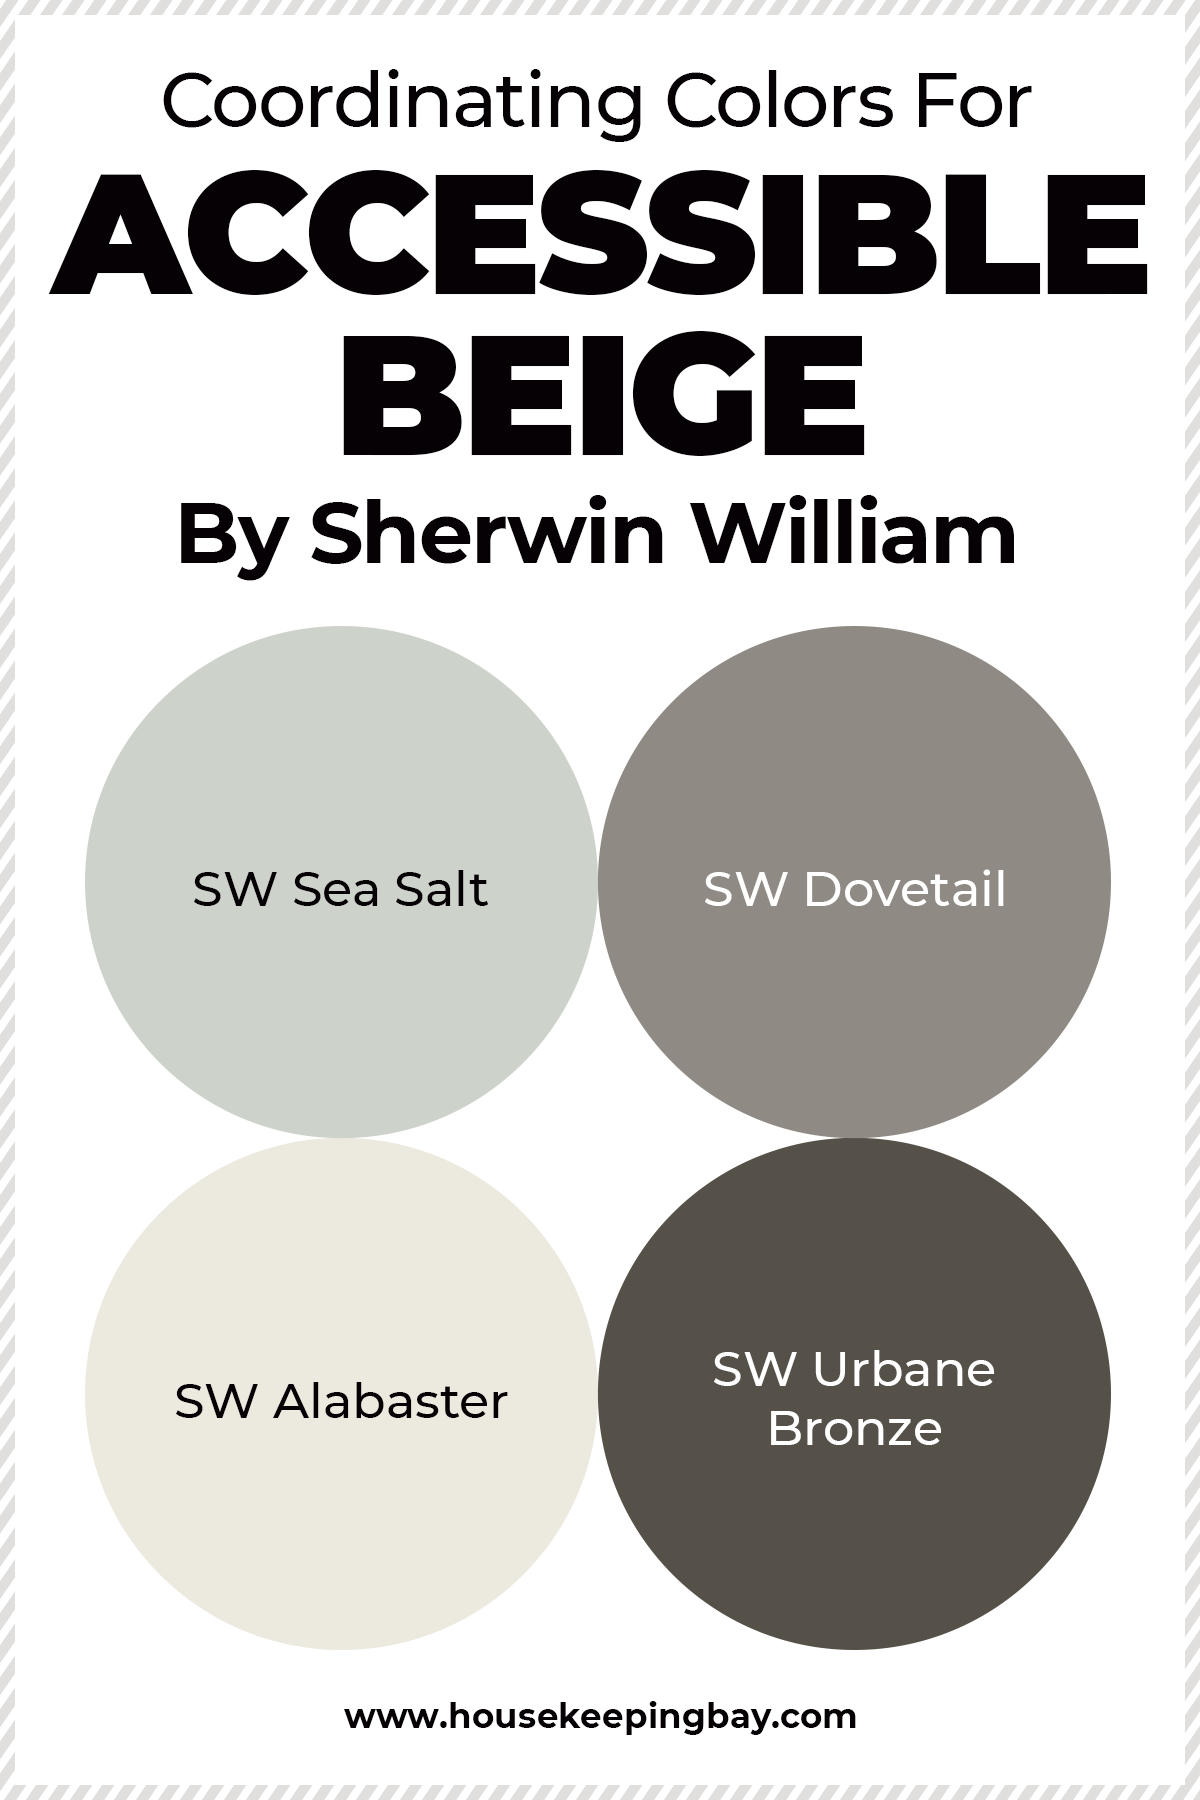 Coordinating Colors For Accessible Beige By Sherwin William